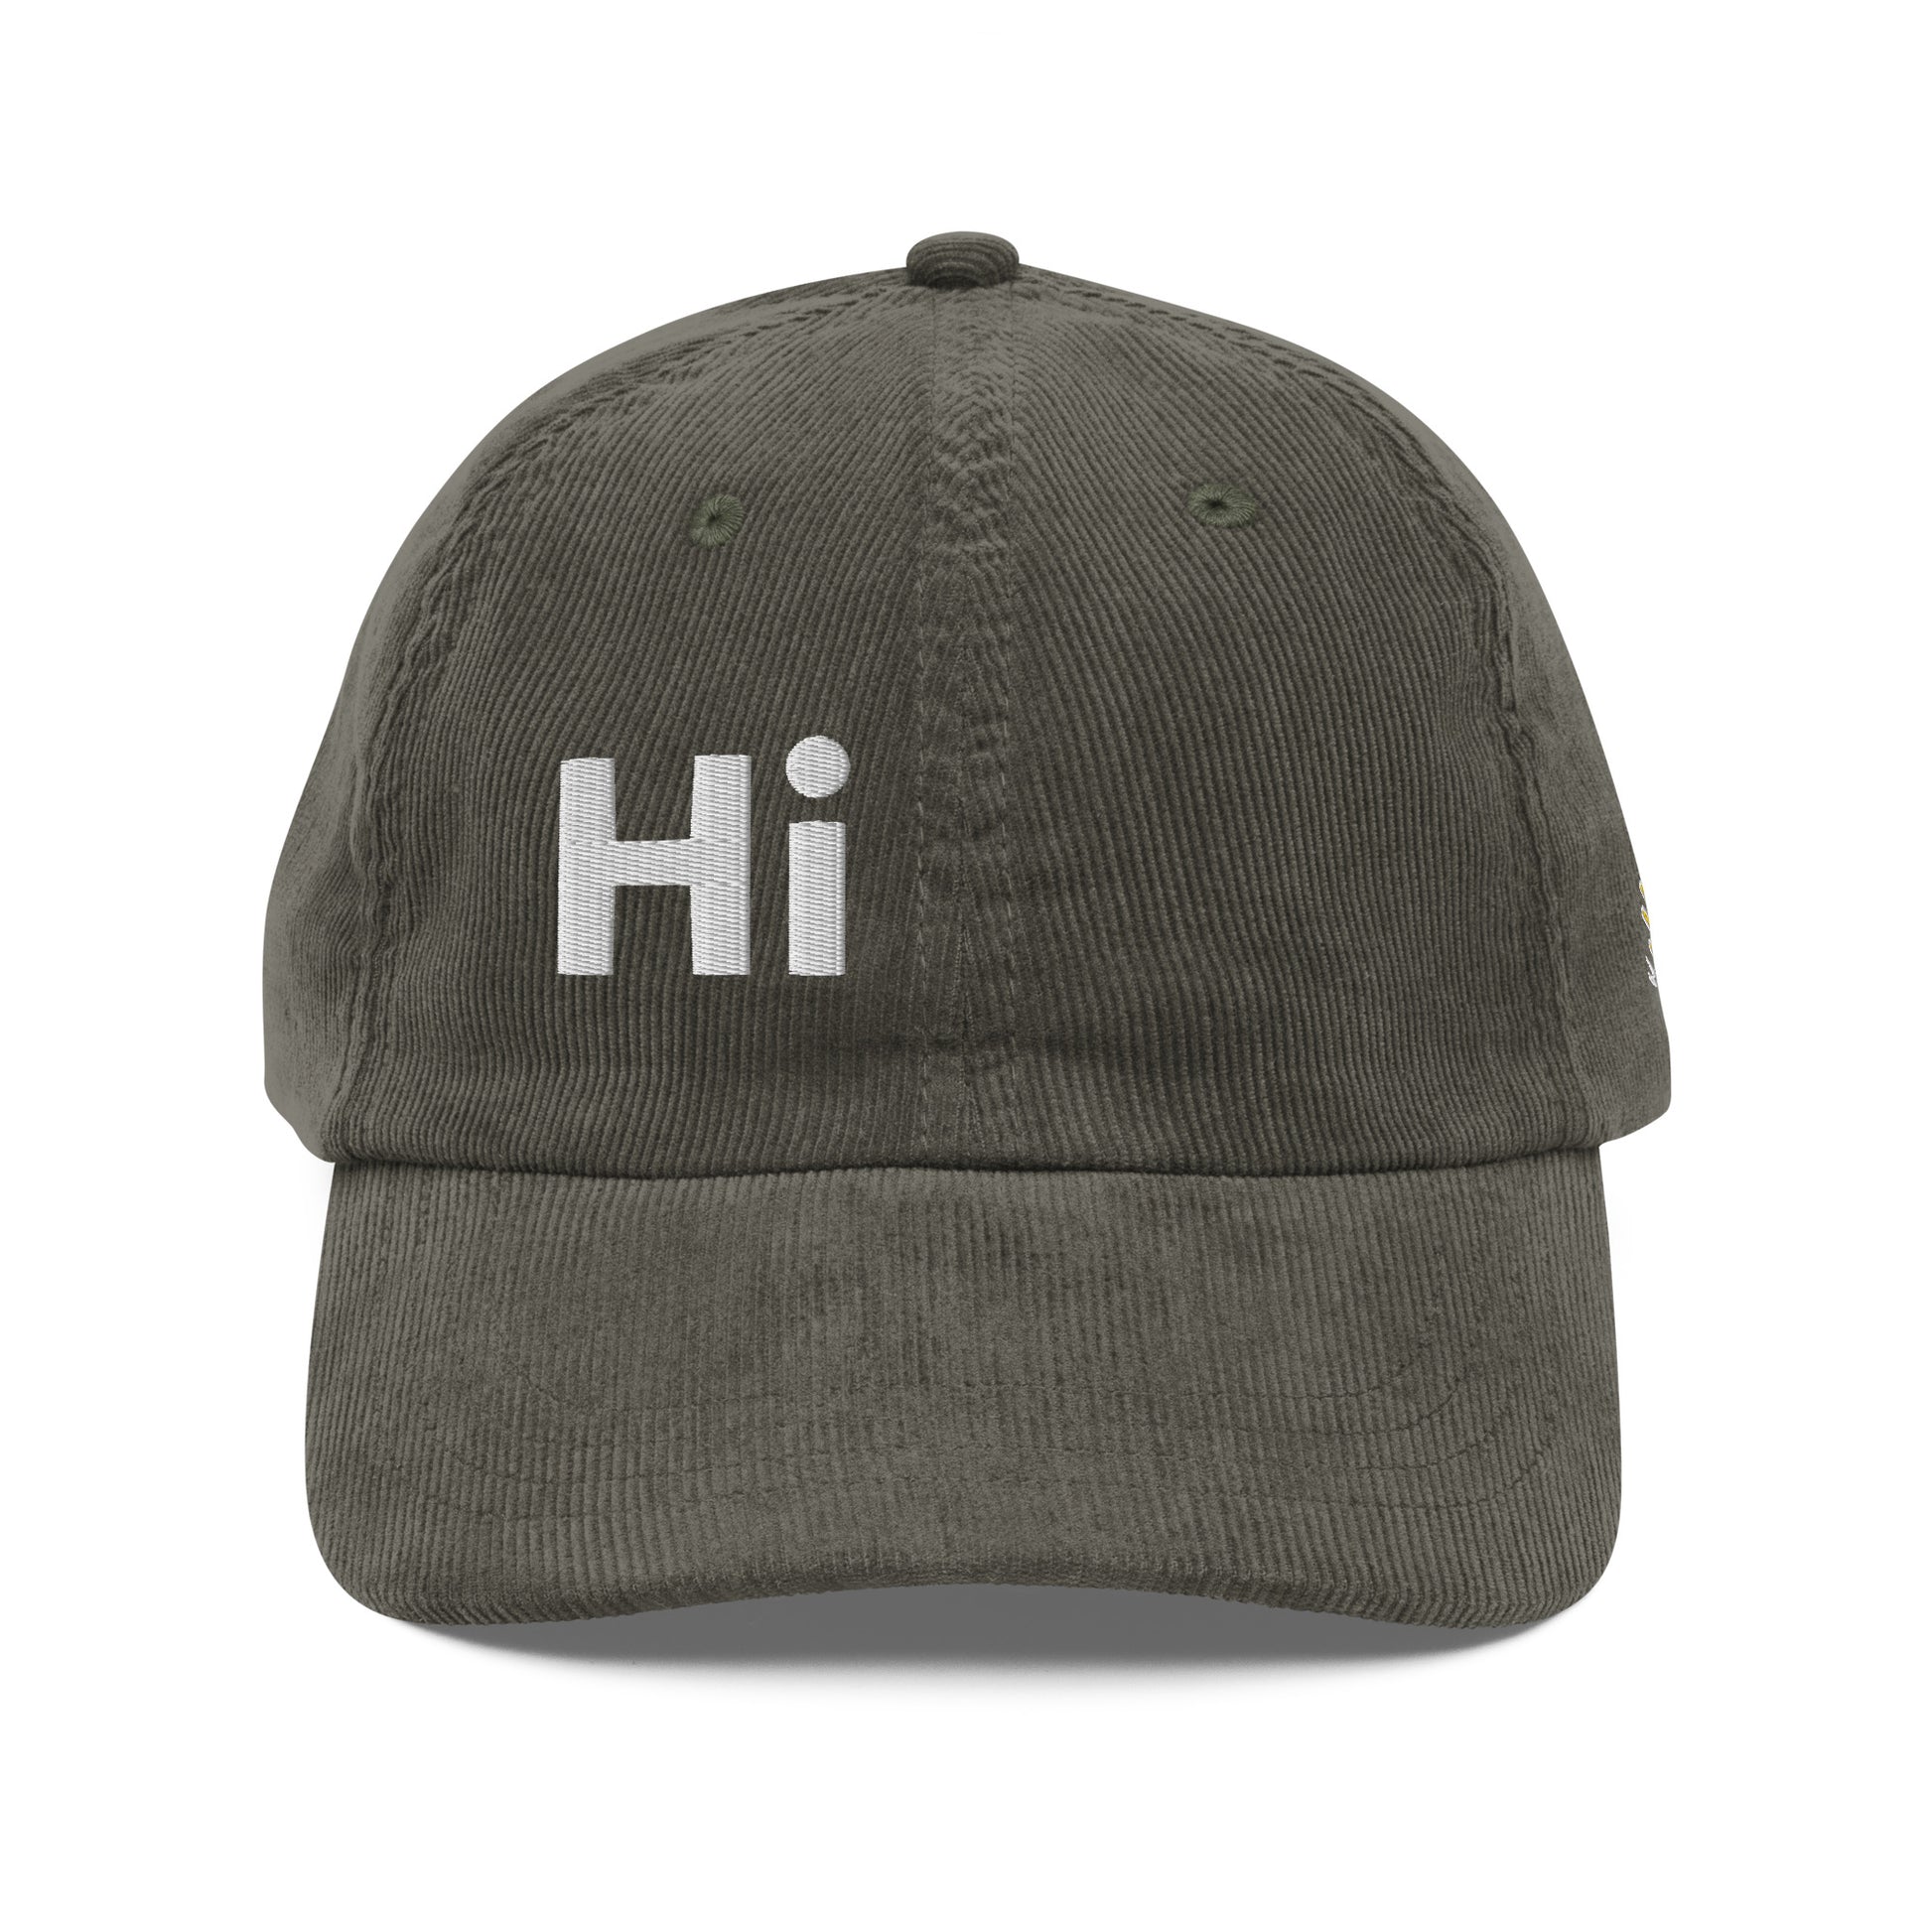 Hi Shalom Hebrew Corduroy Hat by Happy interactions in Green